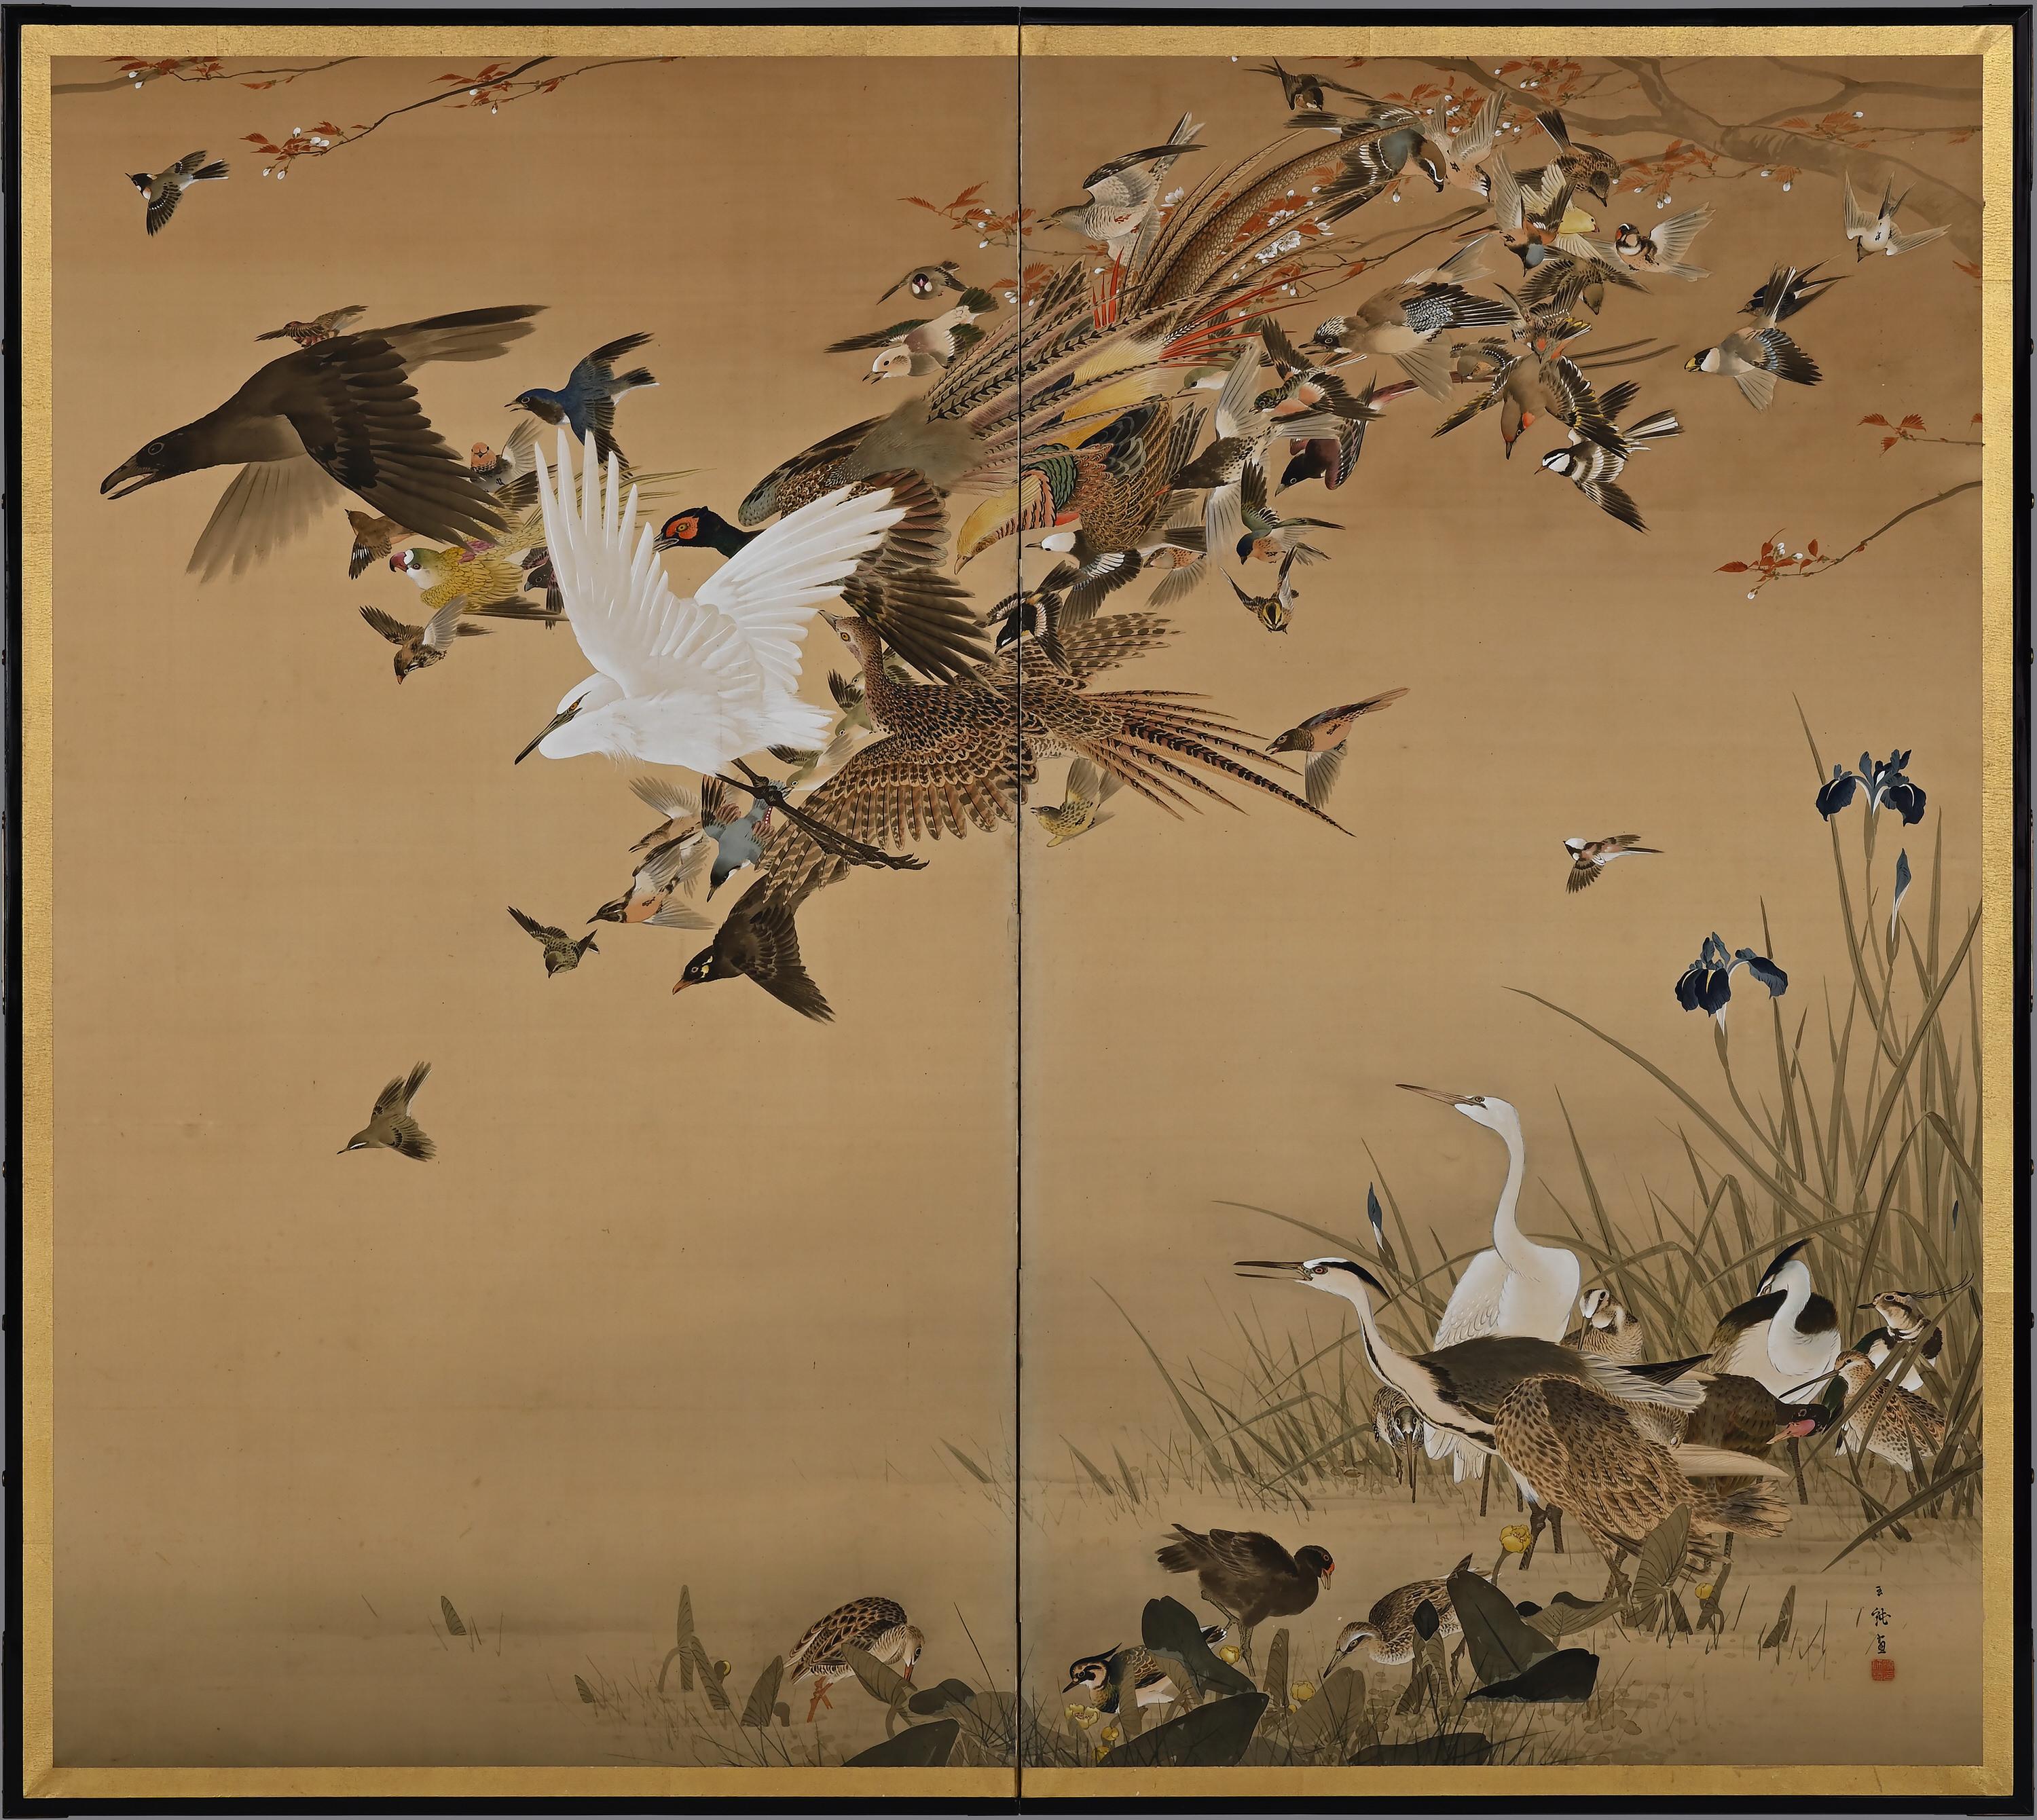 One hundred birds

Hasegawa Gyokujun (1863-1921)

Meiji period, circa 1900.

Ink, color and gofun on silk.

Dimensions of each screen:
H. 170 cm x W. 190 cm (67’’ x 75”)

Despite the title, well over 100 birds are represented in this pair